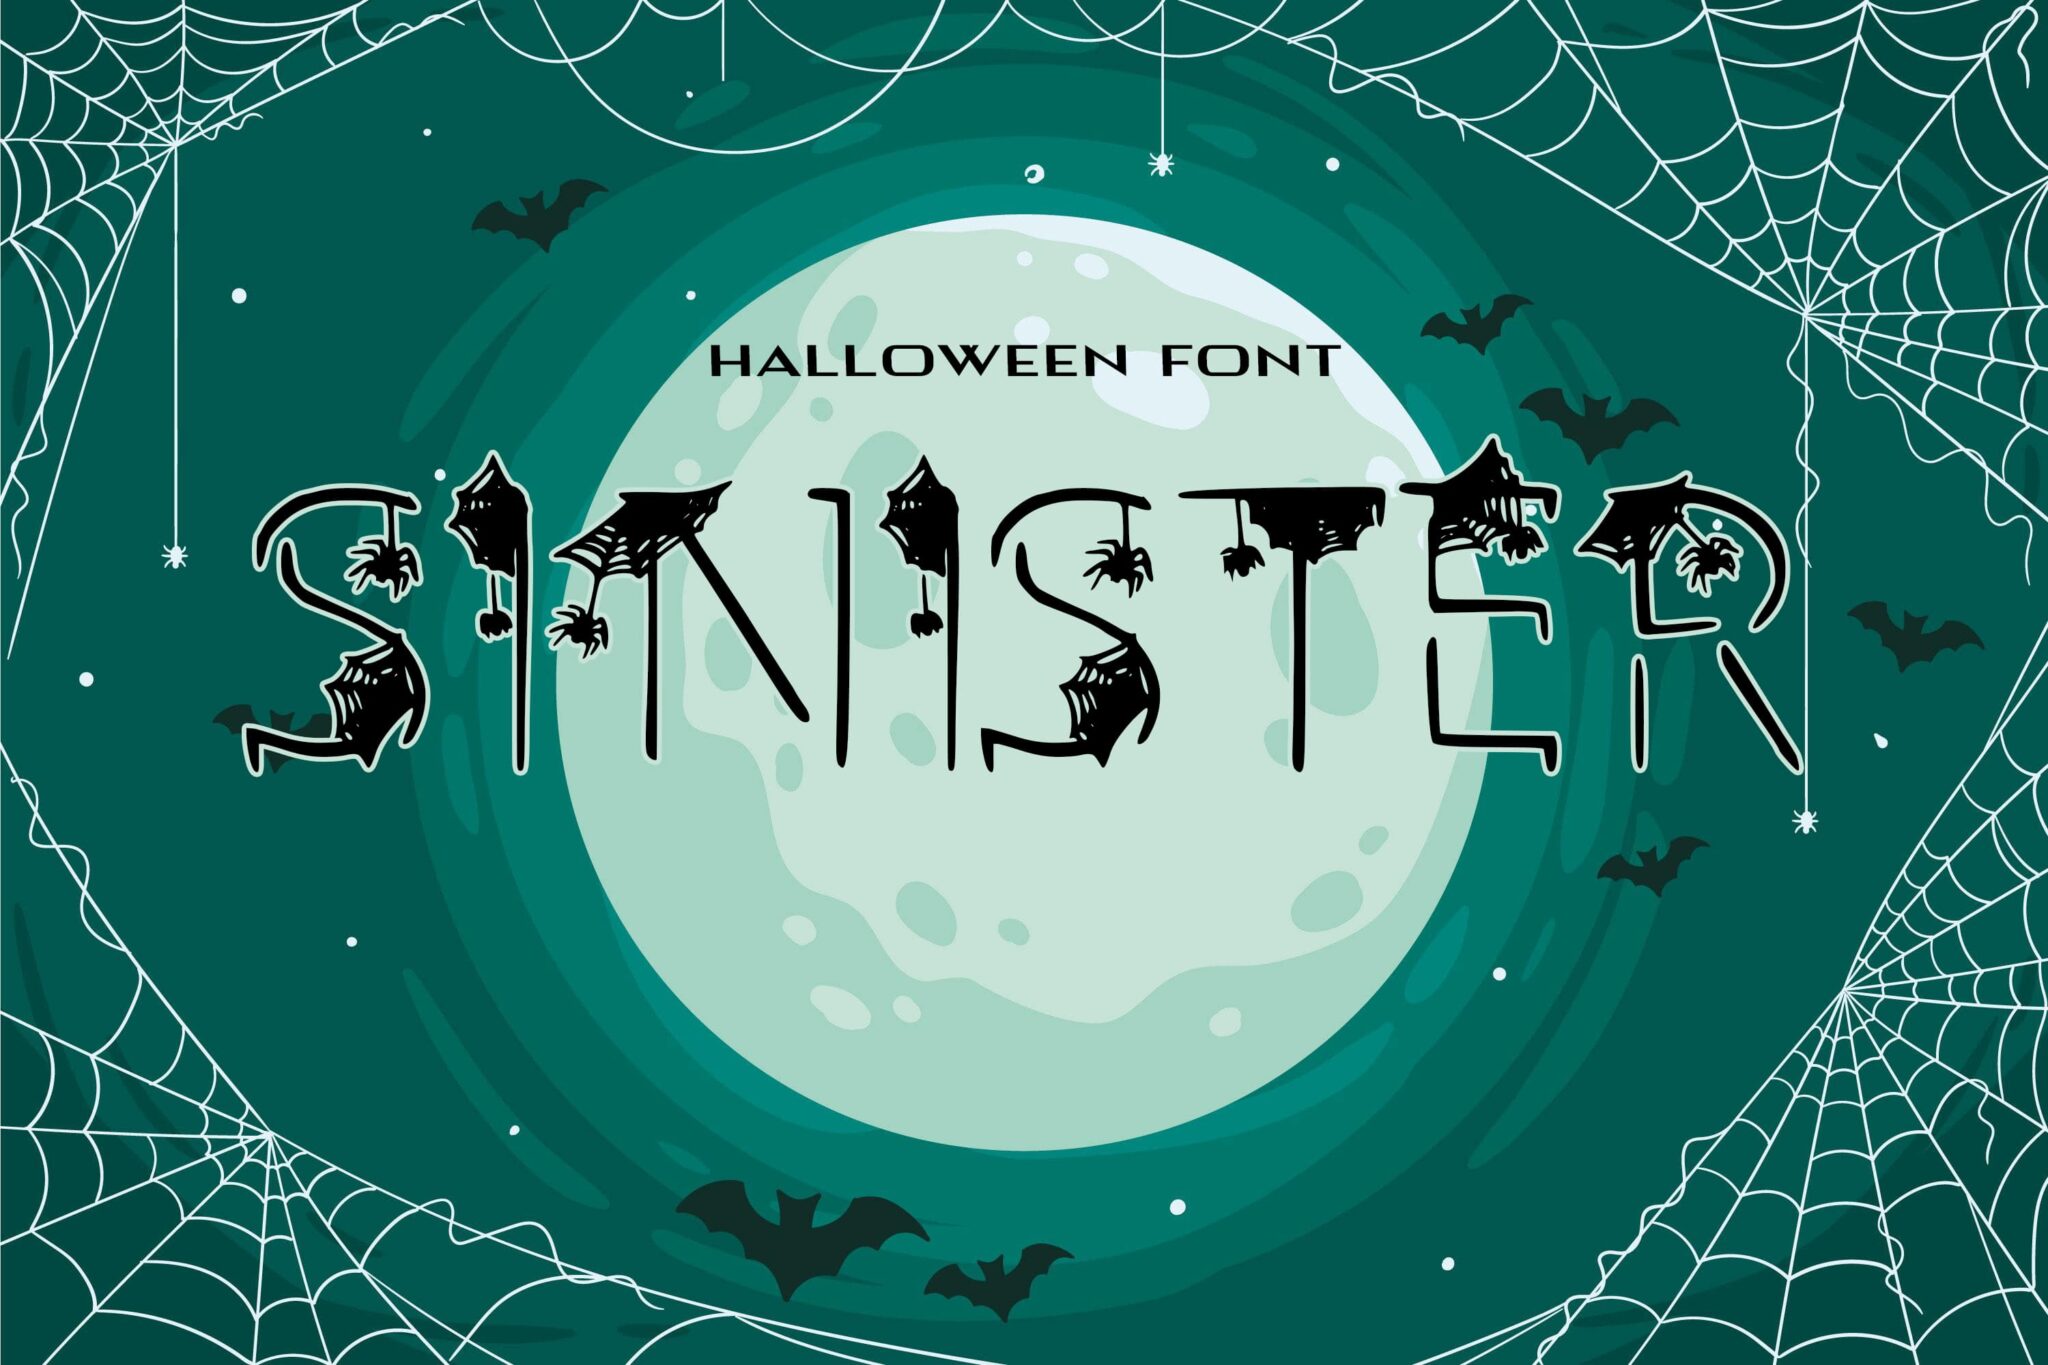 Cool Halloween font with some scary graphic elements.